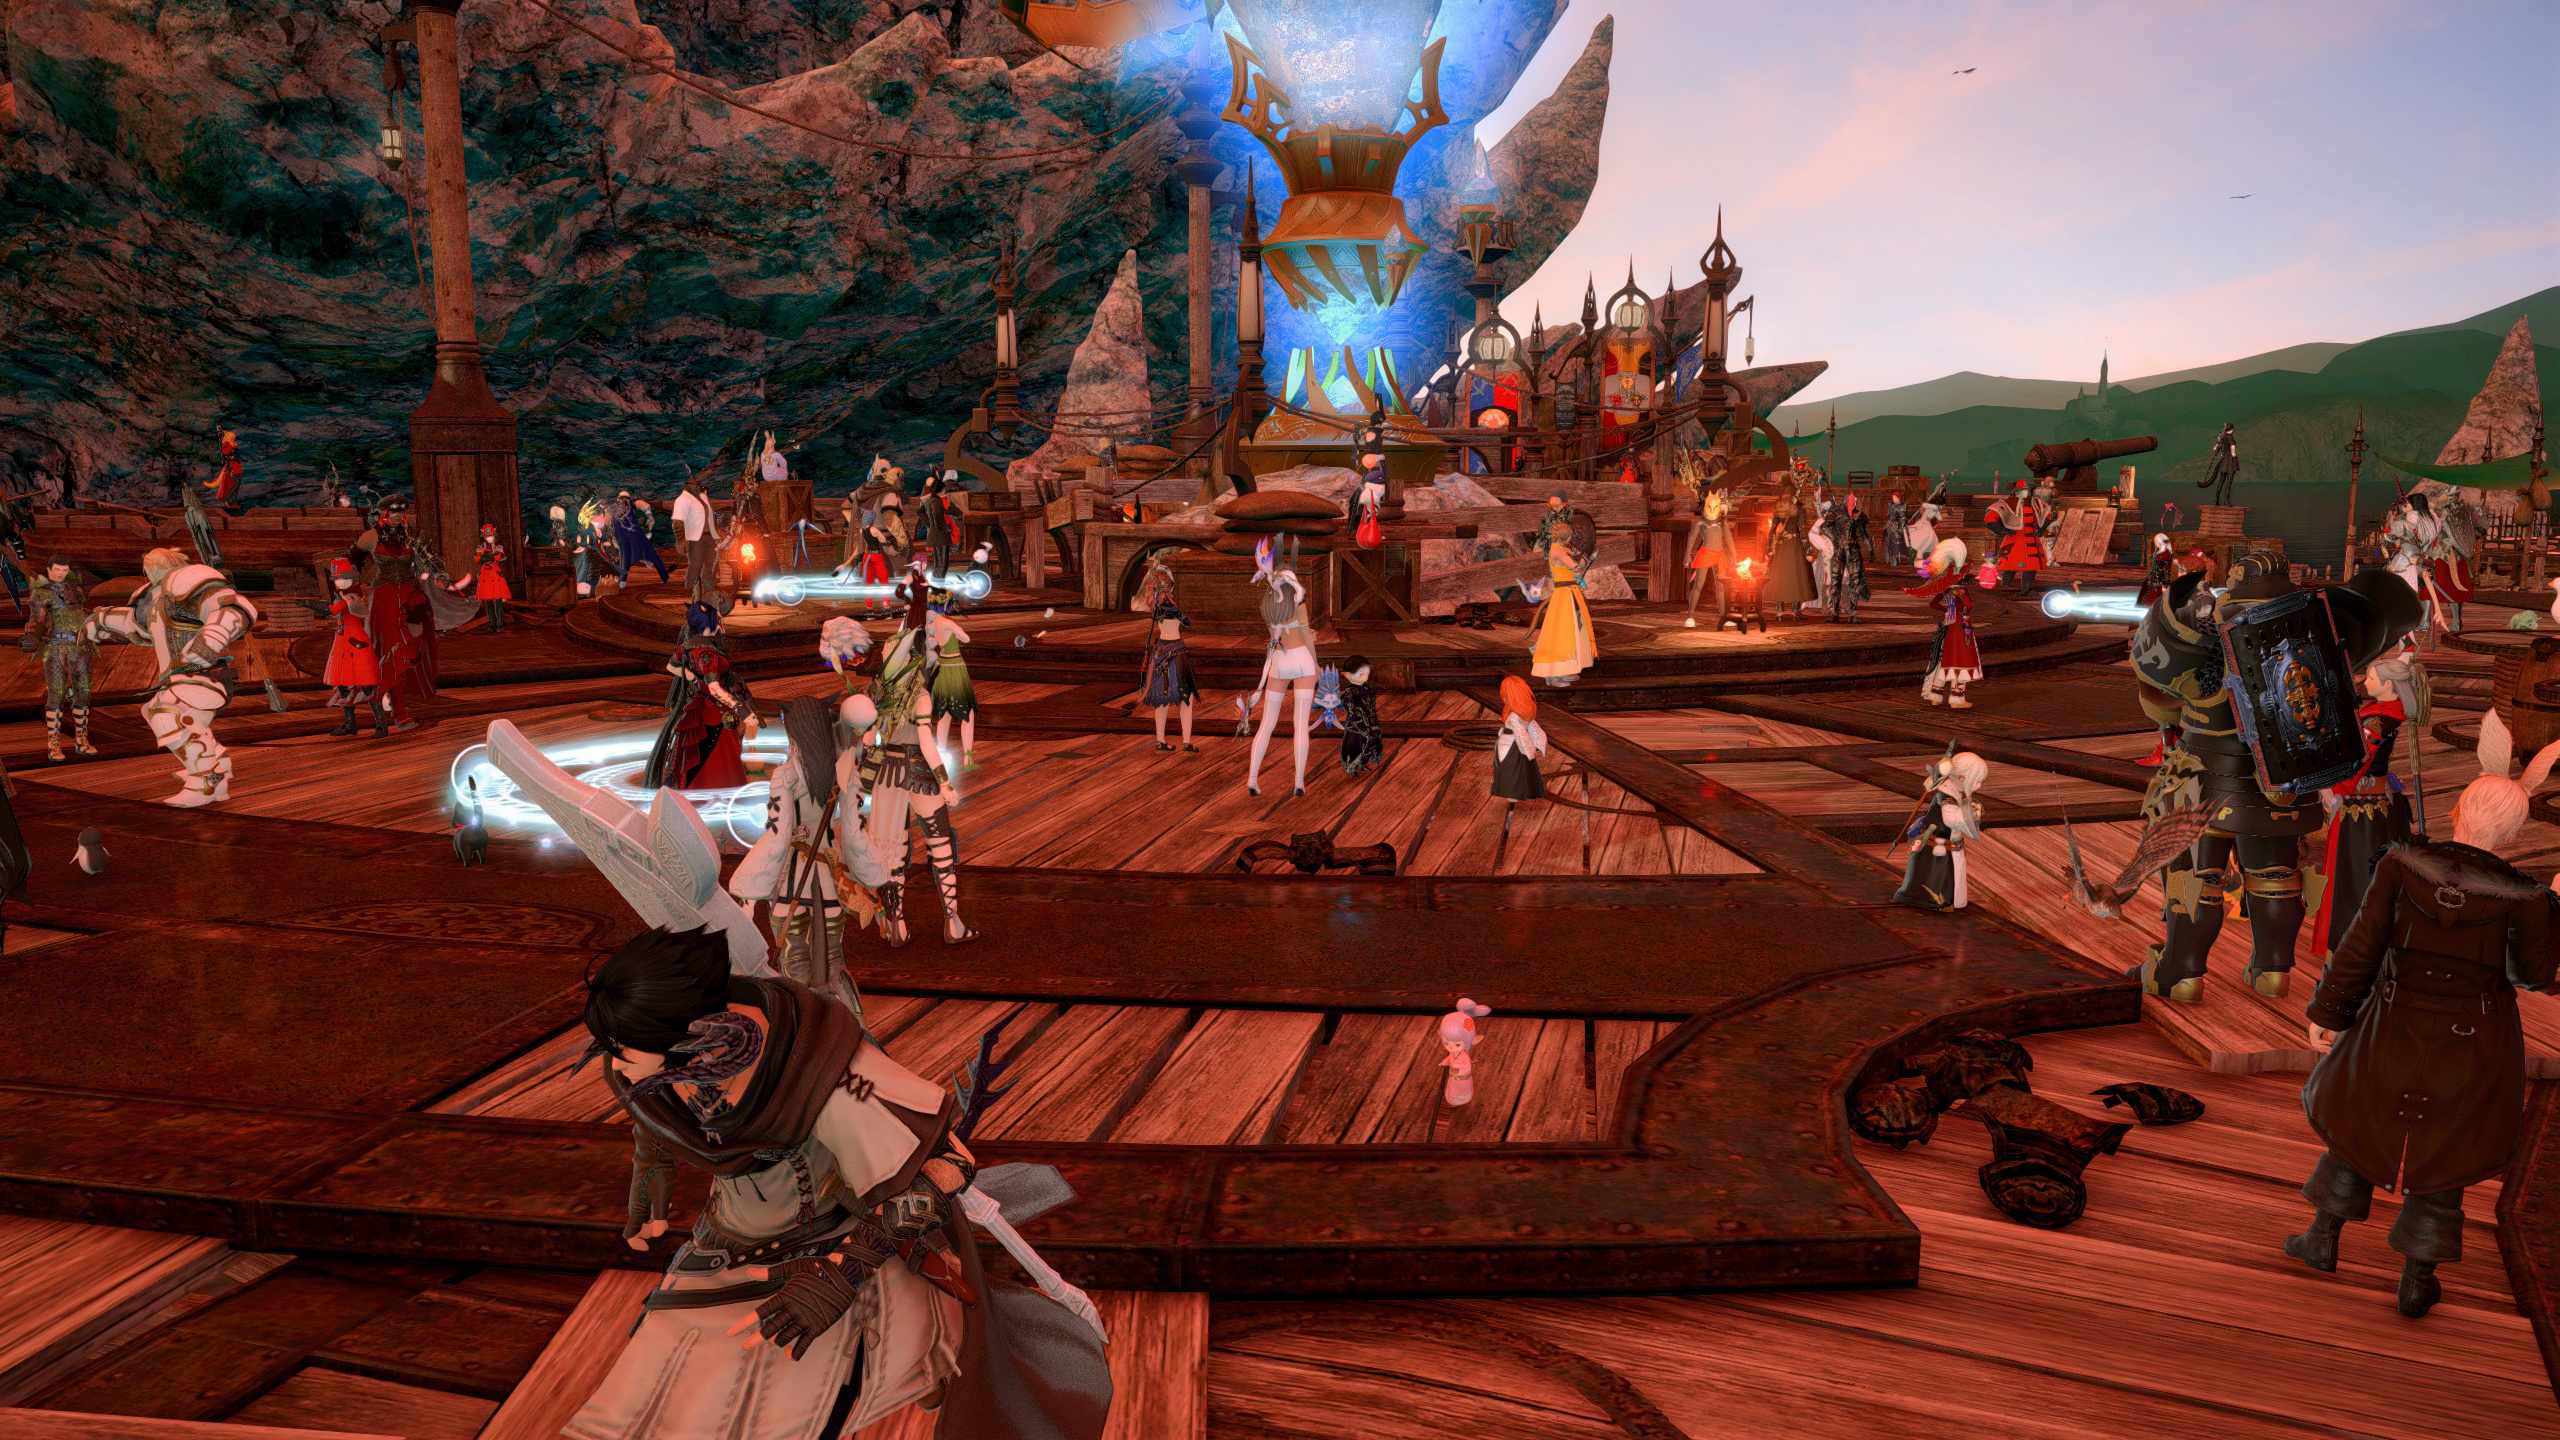 Hundreds of players gathered at Wolves' Den Pier in Final Fantasy 14.